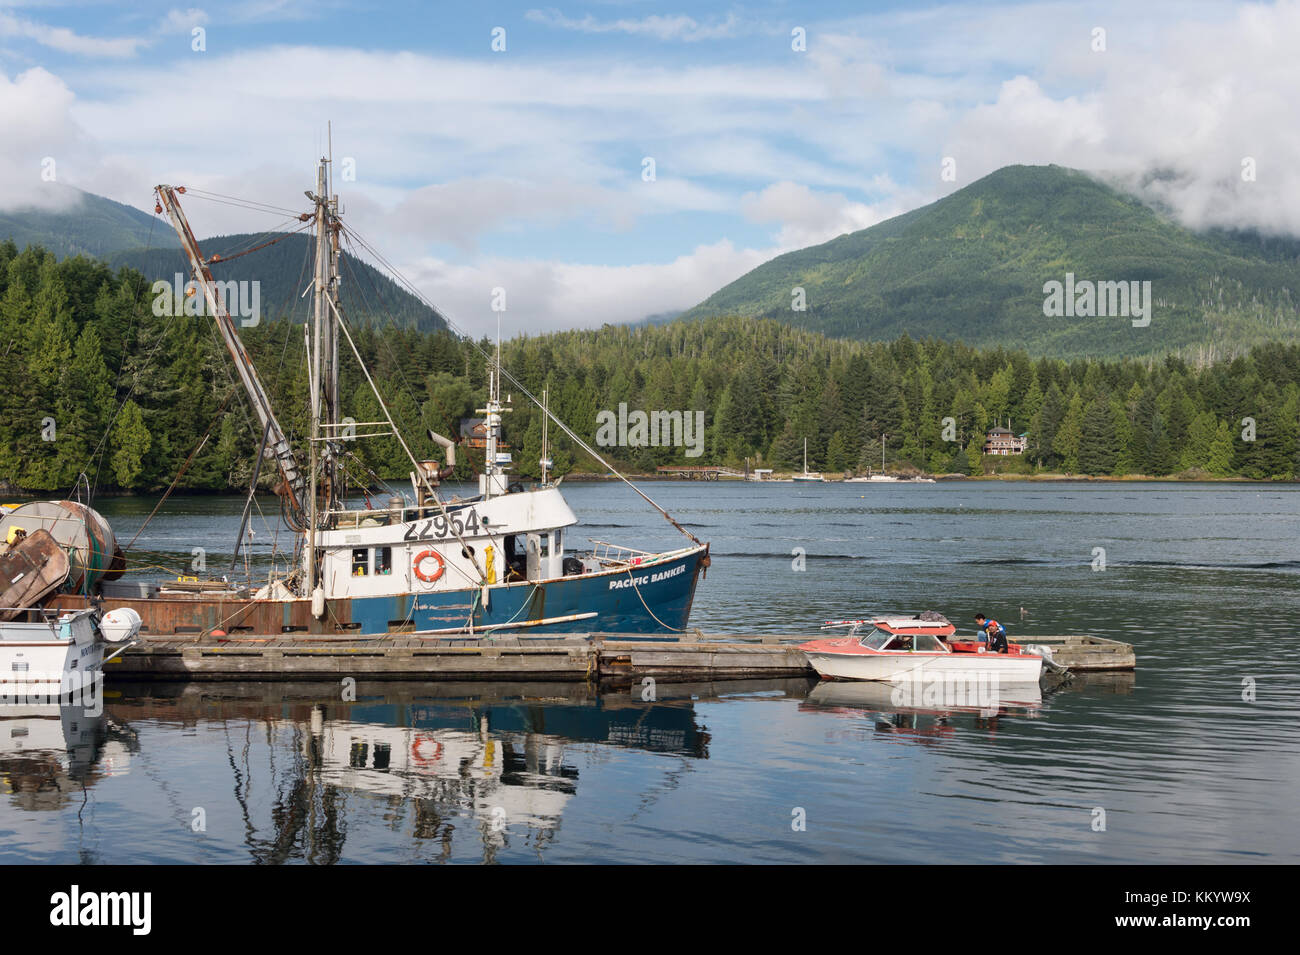 Ucluelet, BC, Canada - 8 September 2017: Fishing boats at Ucluelet Harbour Stock Photo